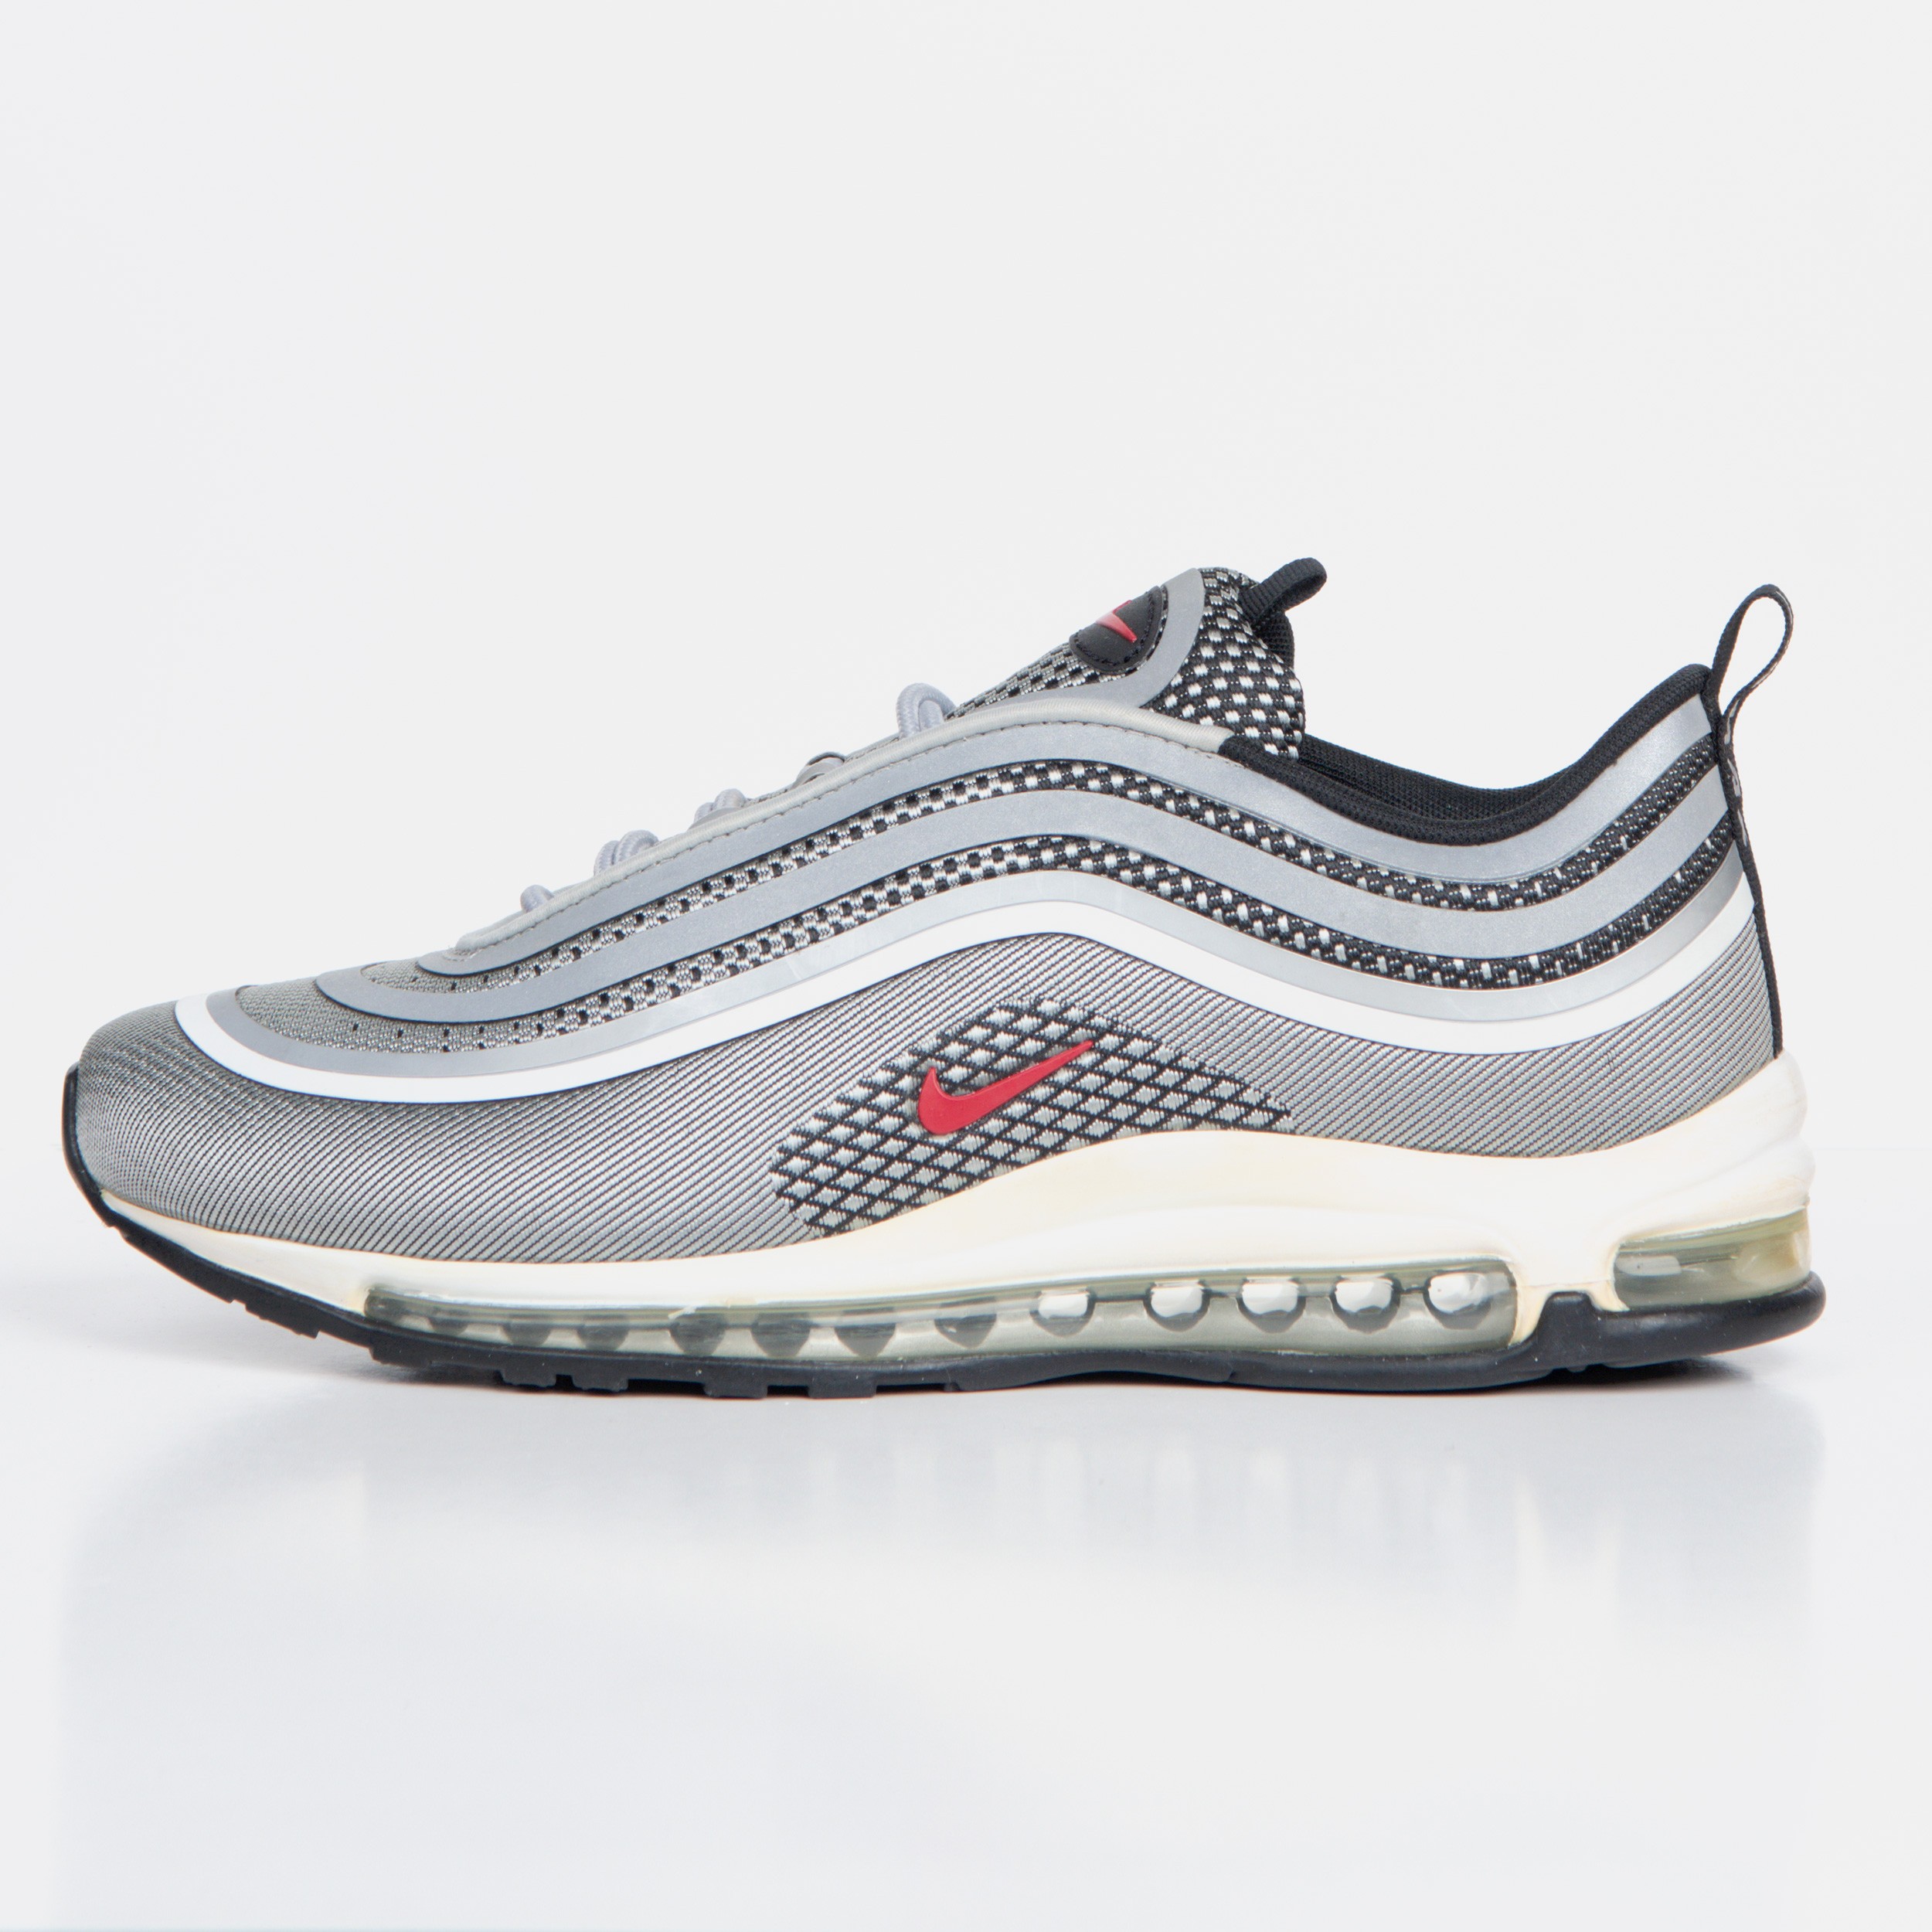 RE-POCKETS NIKE TRAINERS RE-POCKETS Nike Air Max 97 Ultra 17 Silver Bullet